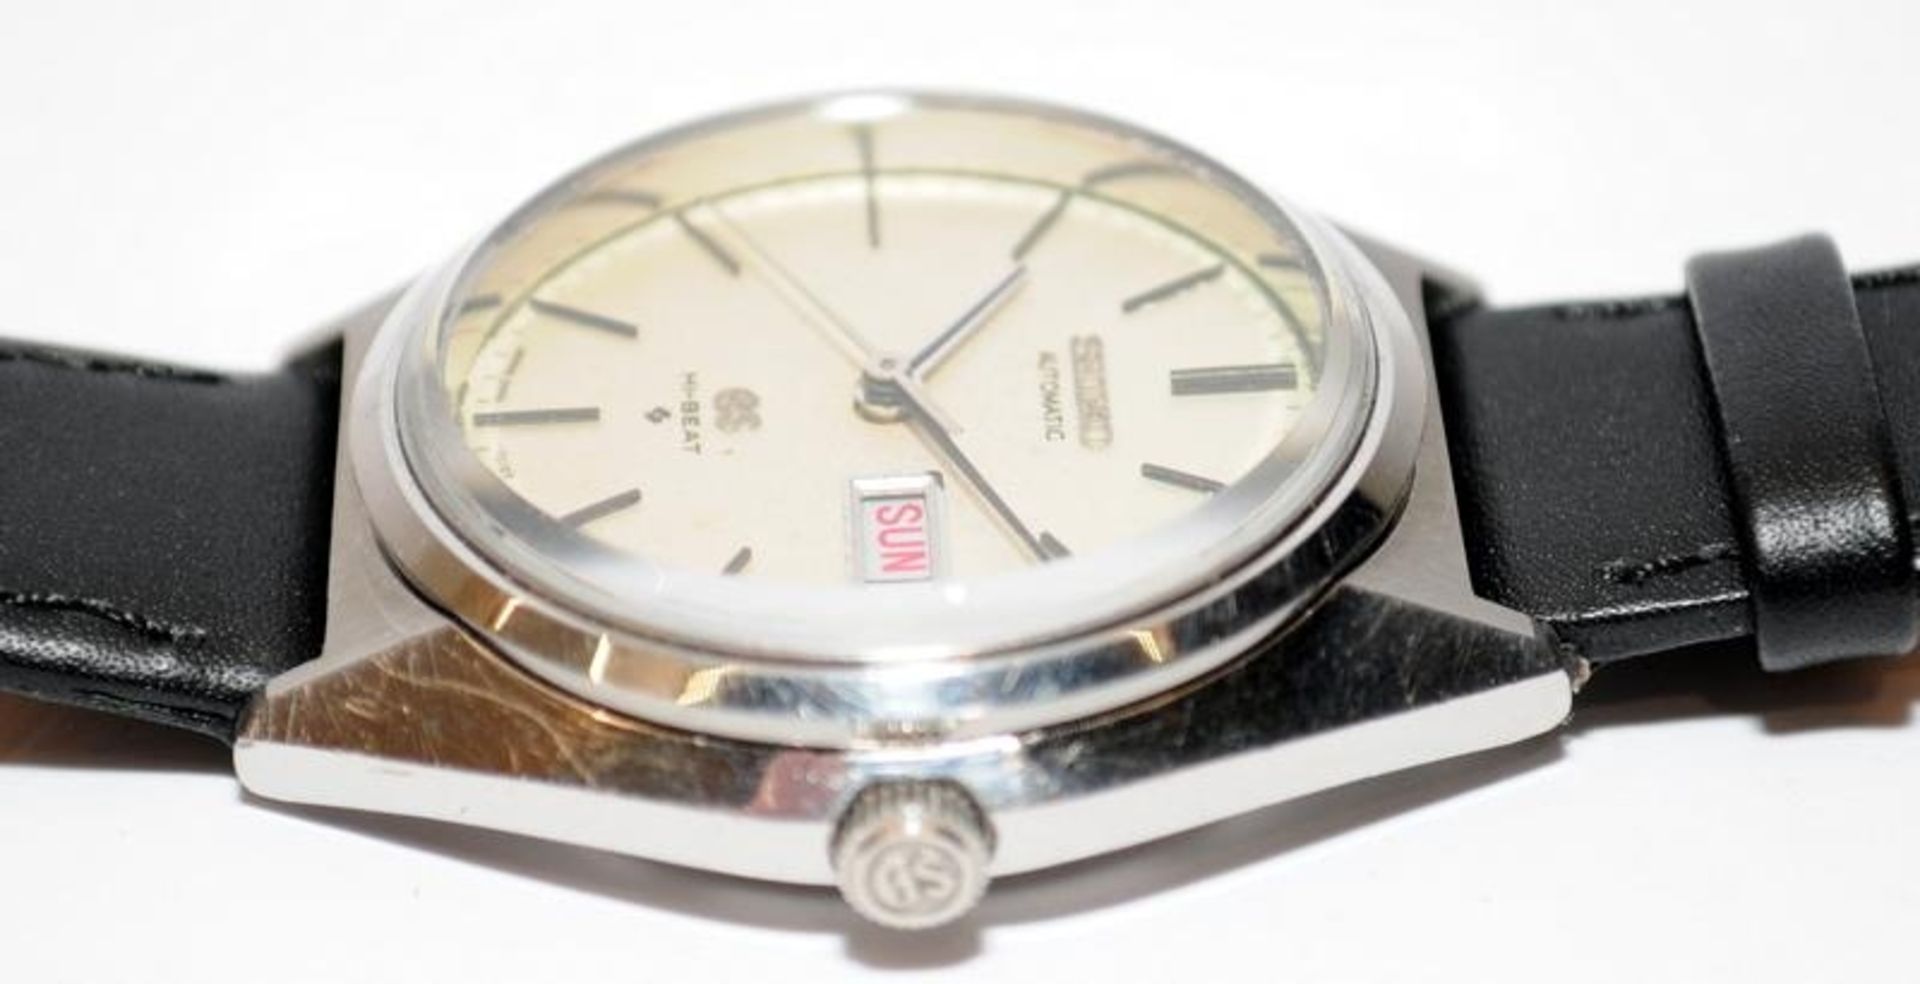 Top quality vintage Grand Seiko 56GS series gents automatic dress watch model ref 5646-7011, - Image 3 of 4